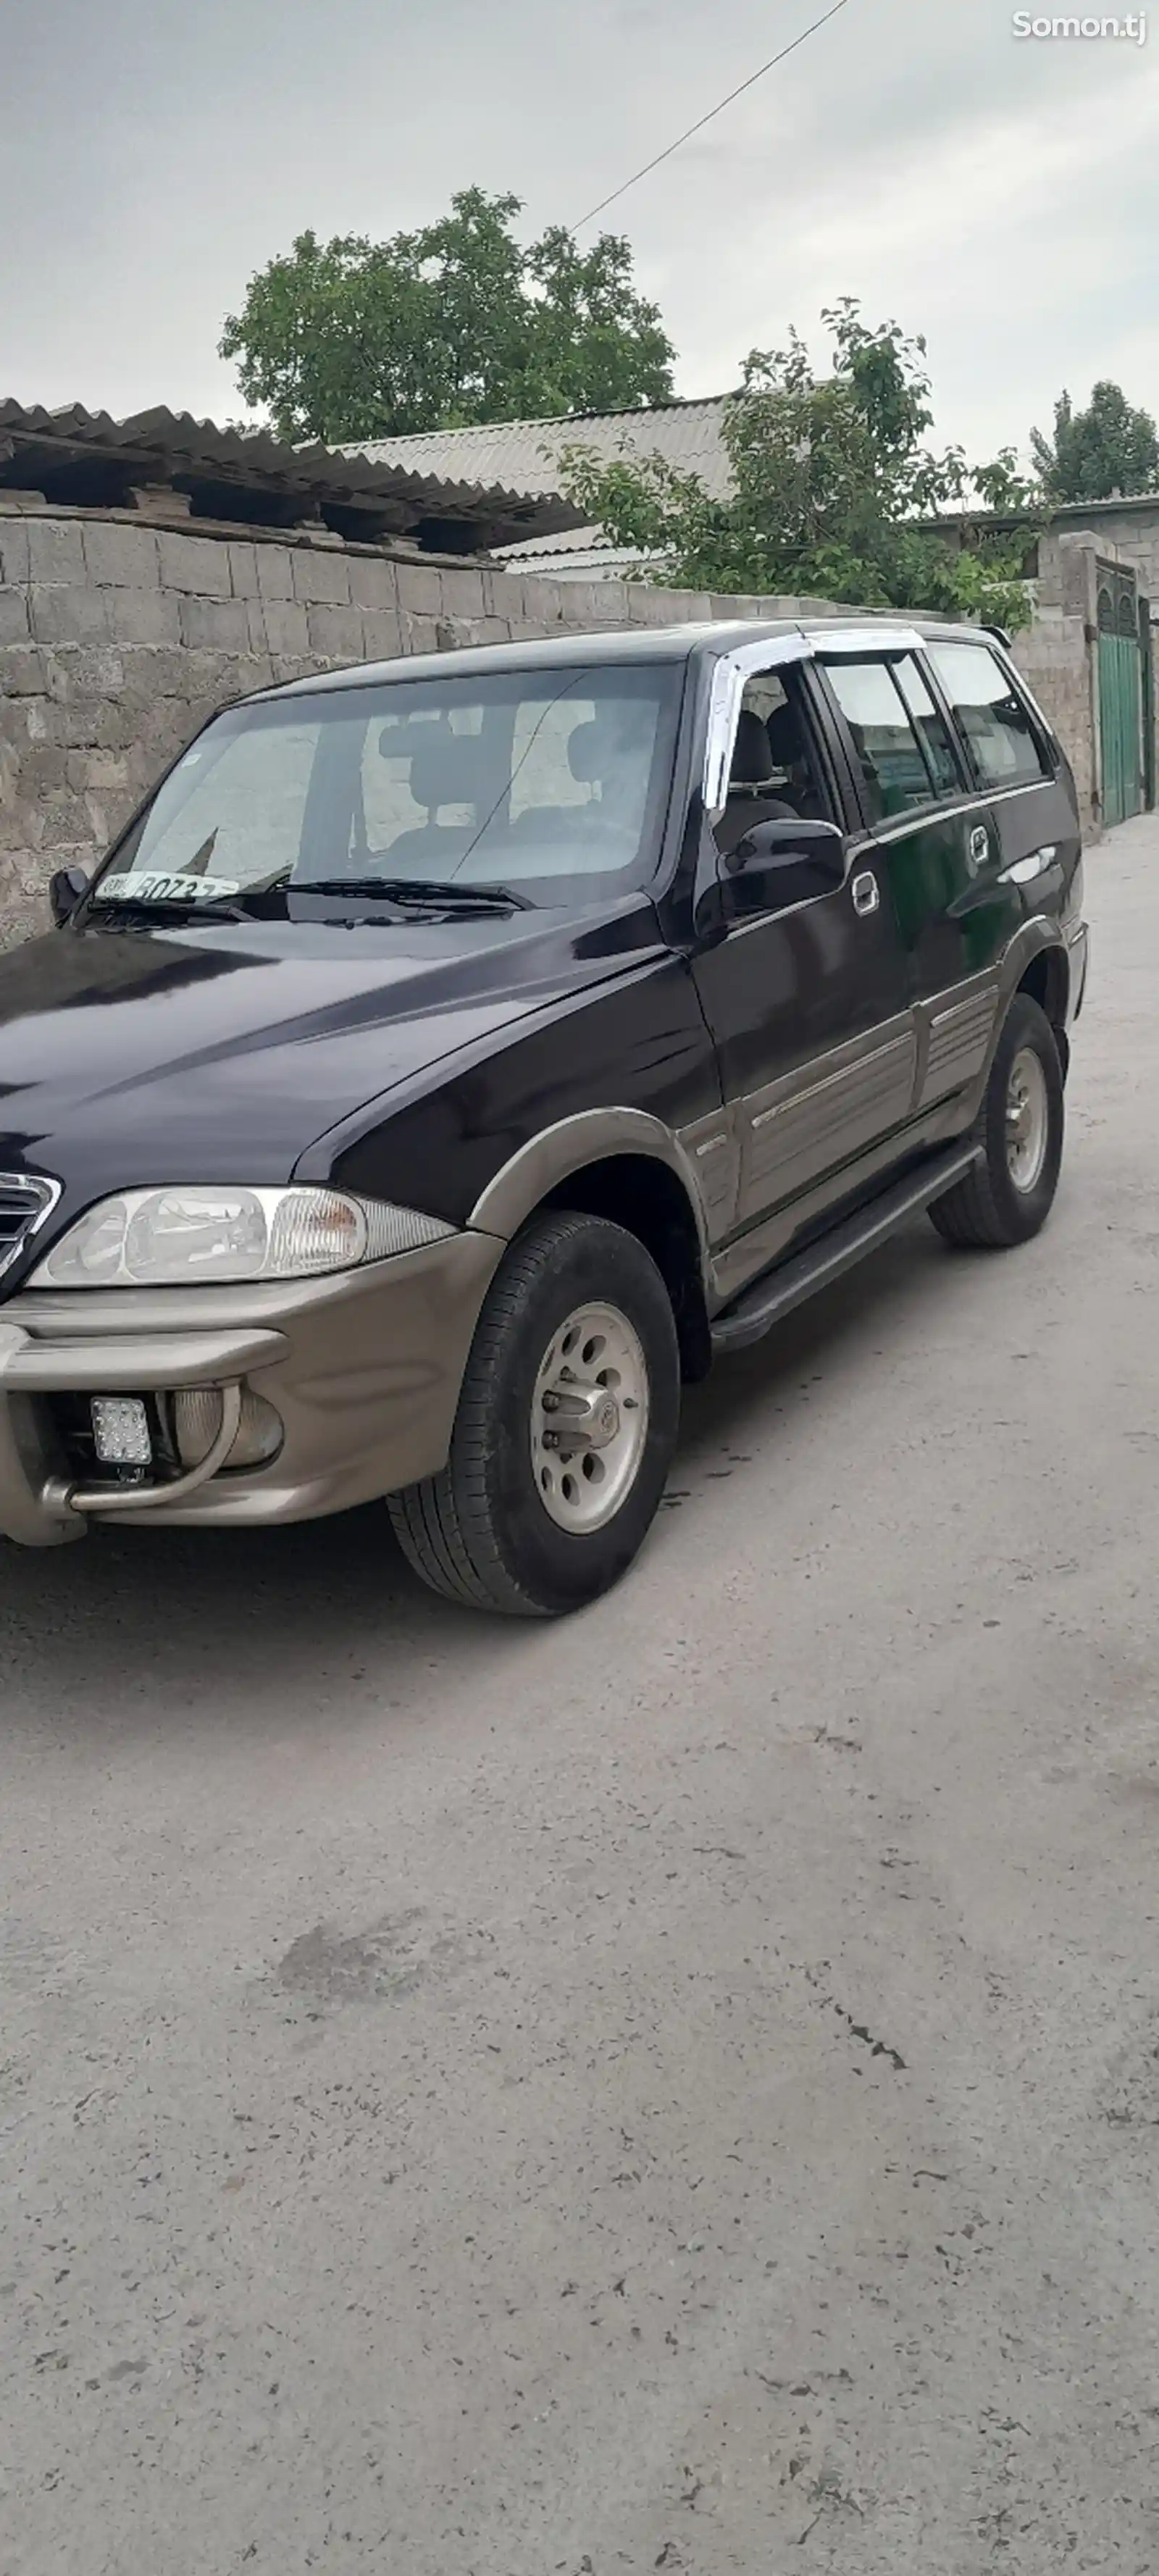 Ssang Yong Musso, 2000-2